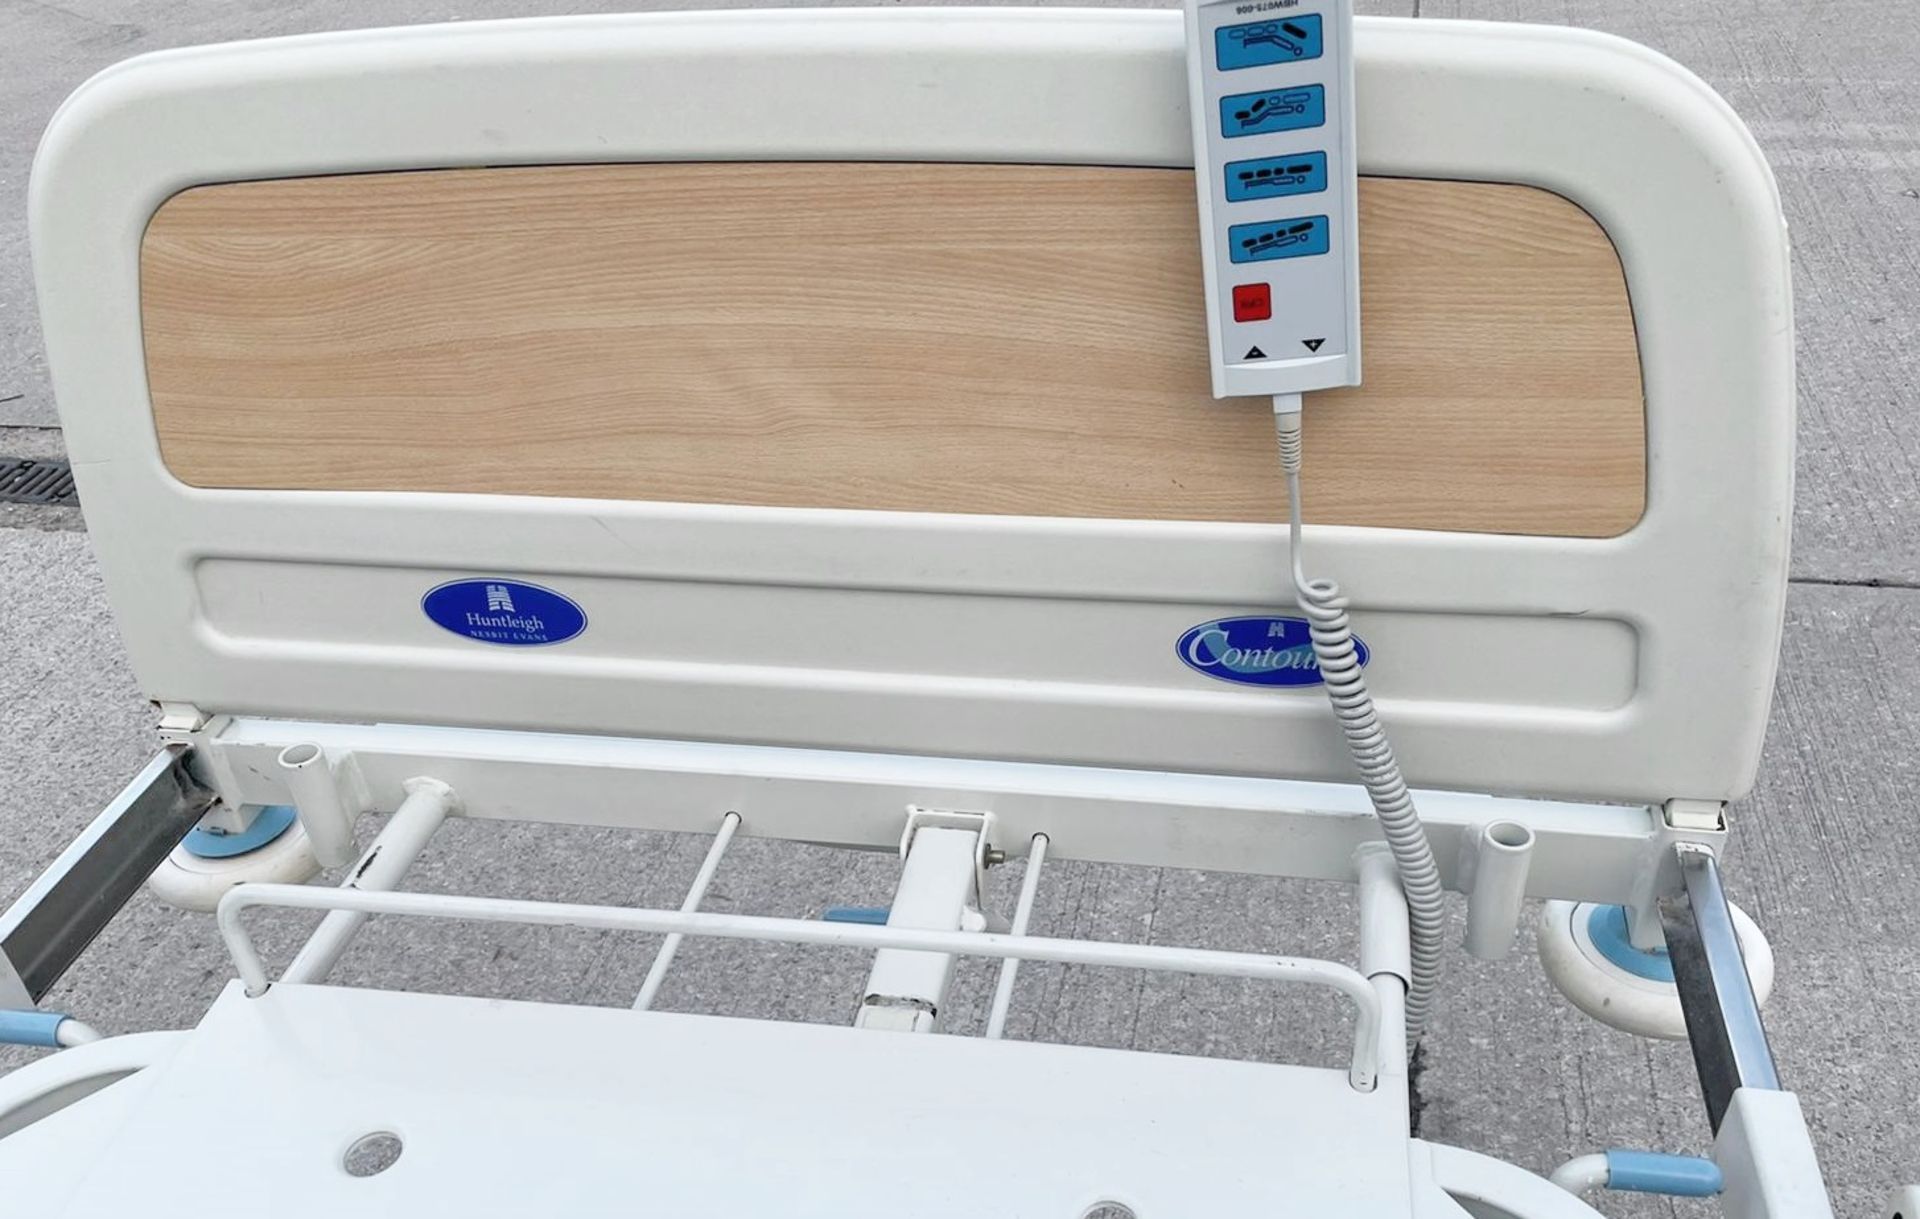 1 x Huntleigh CONTOURA Electric Hospital Bed - Features Rise/Fall 3-Way Profiling, Side Rails, - Image 8 of 8